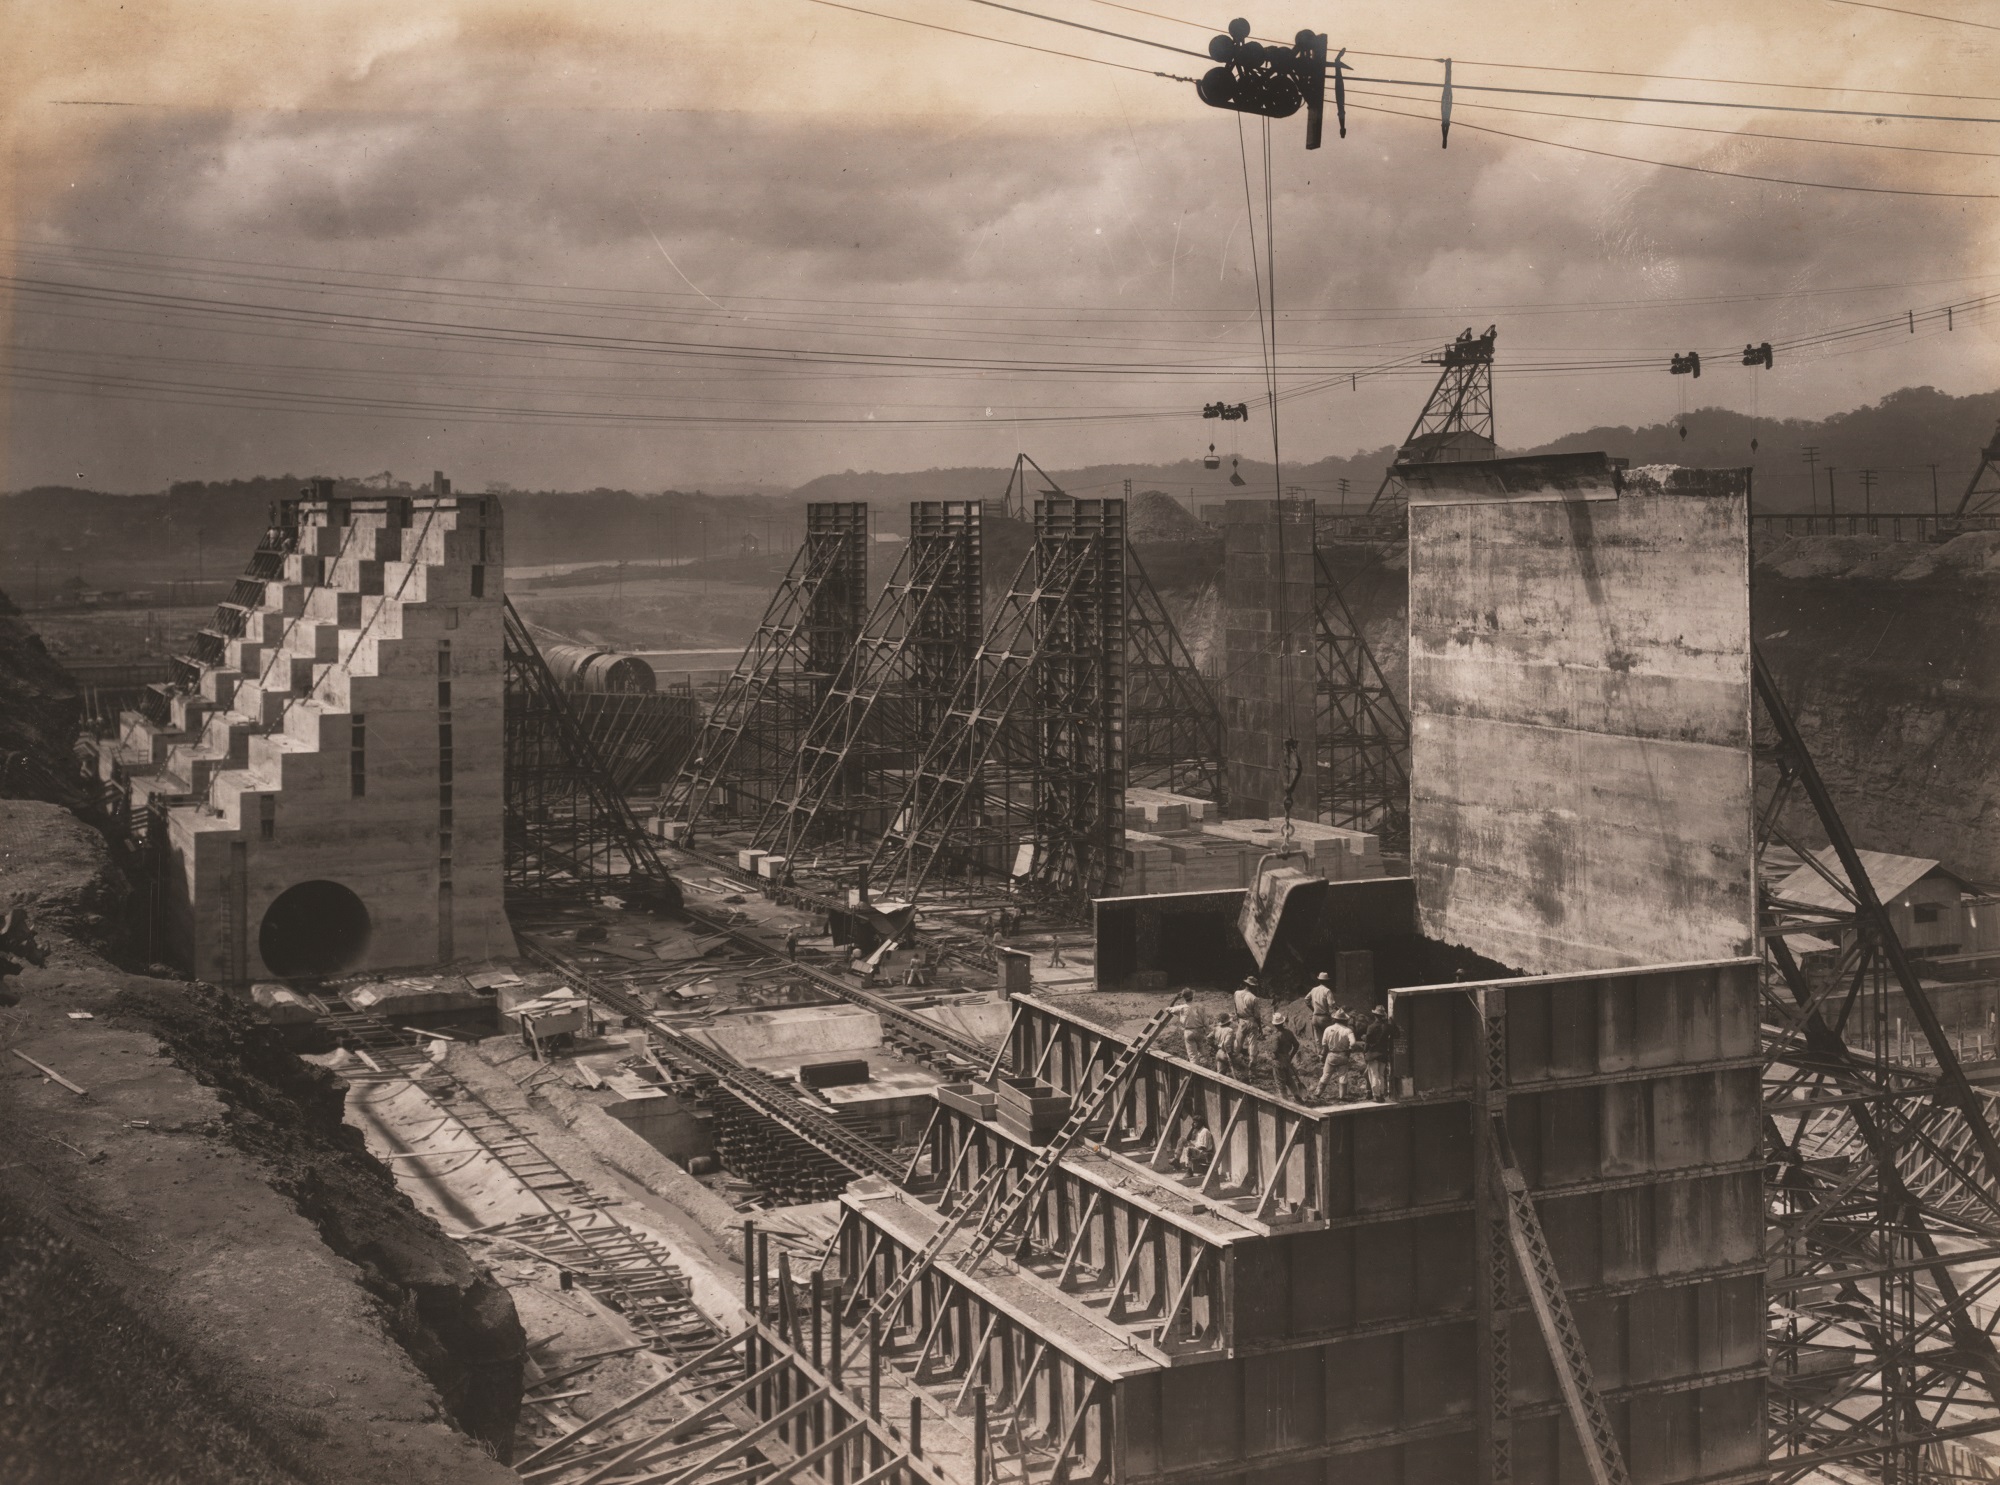 Constructing the sidewall monoliths for the upper lock at Gatun, 1910